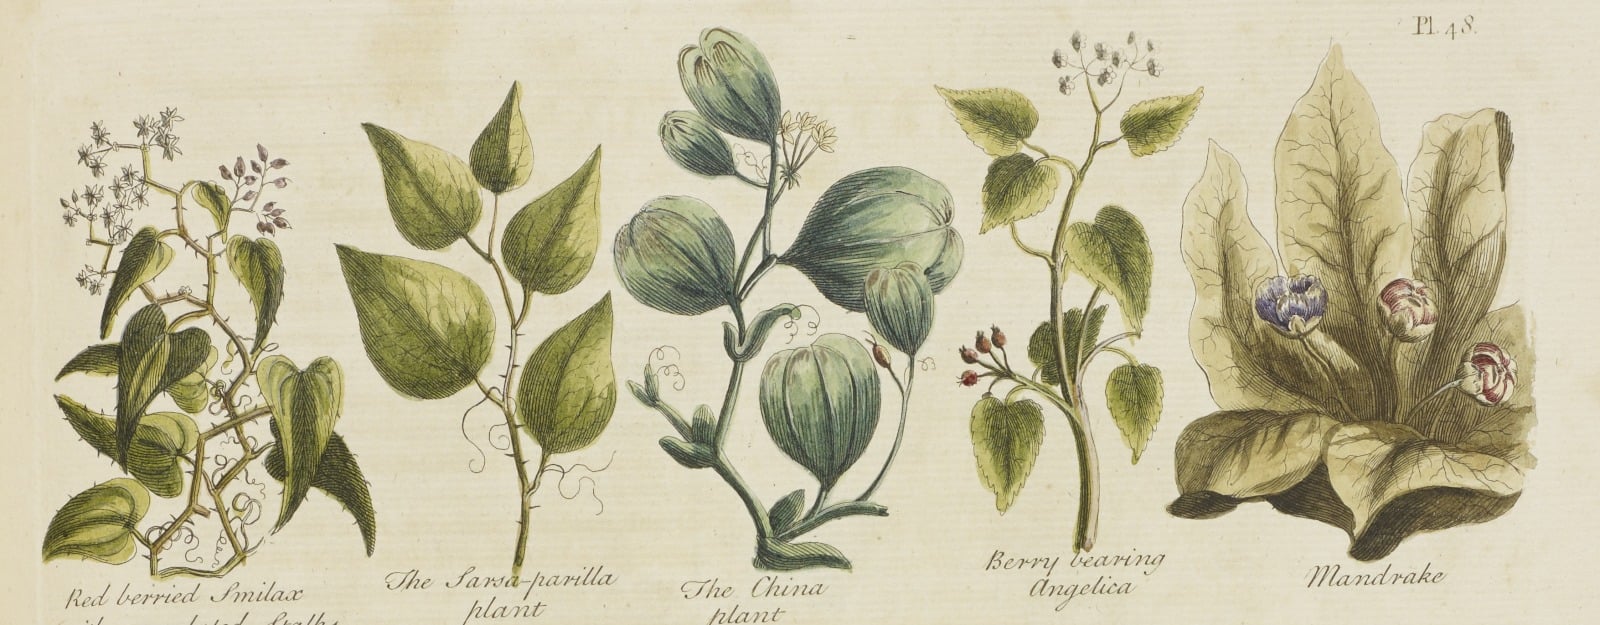 Detail of an illustration showing various garden herbs, from the book by John Hill 'The British herbal: an history of plants and trees, natives of Britain, cultivated for use or raised for beauty' (RCIN 1052134)